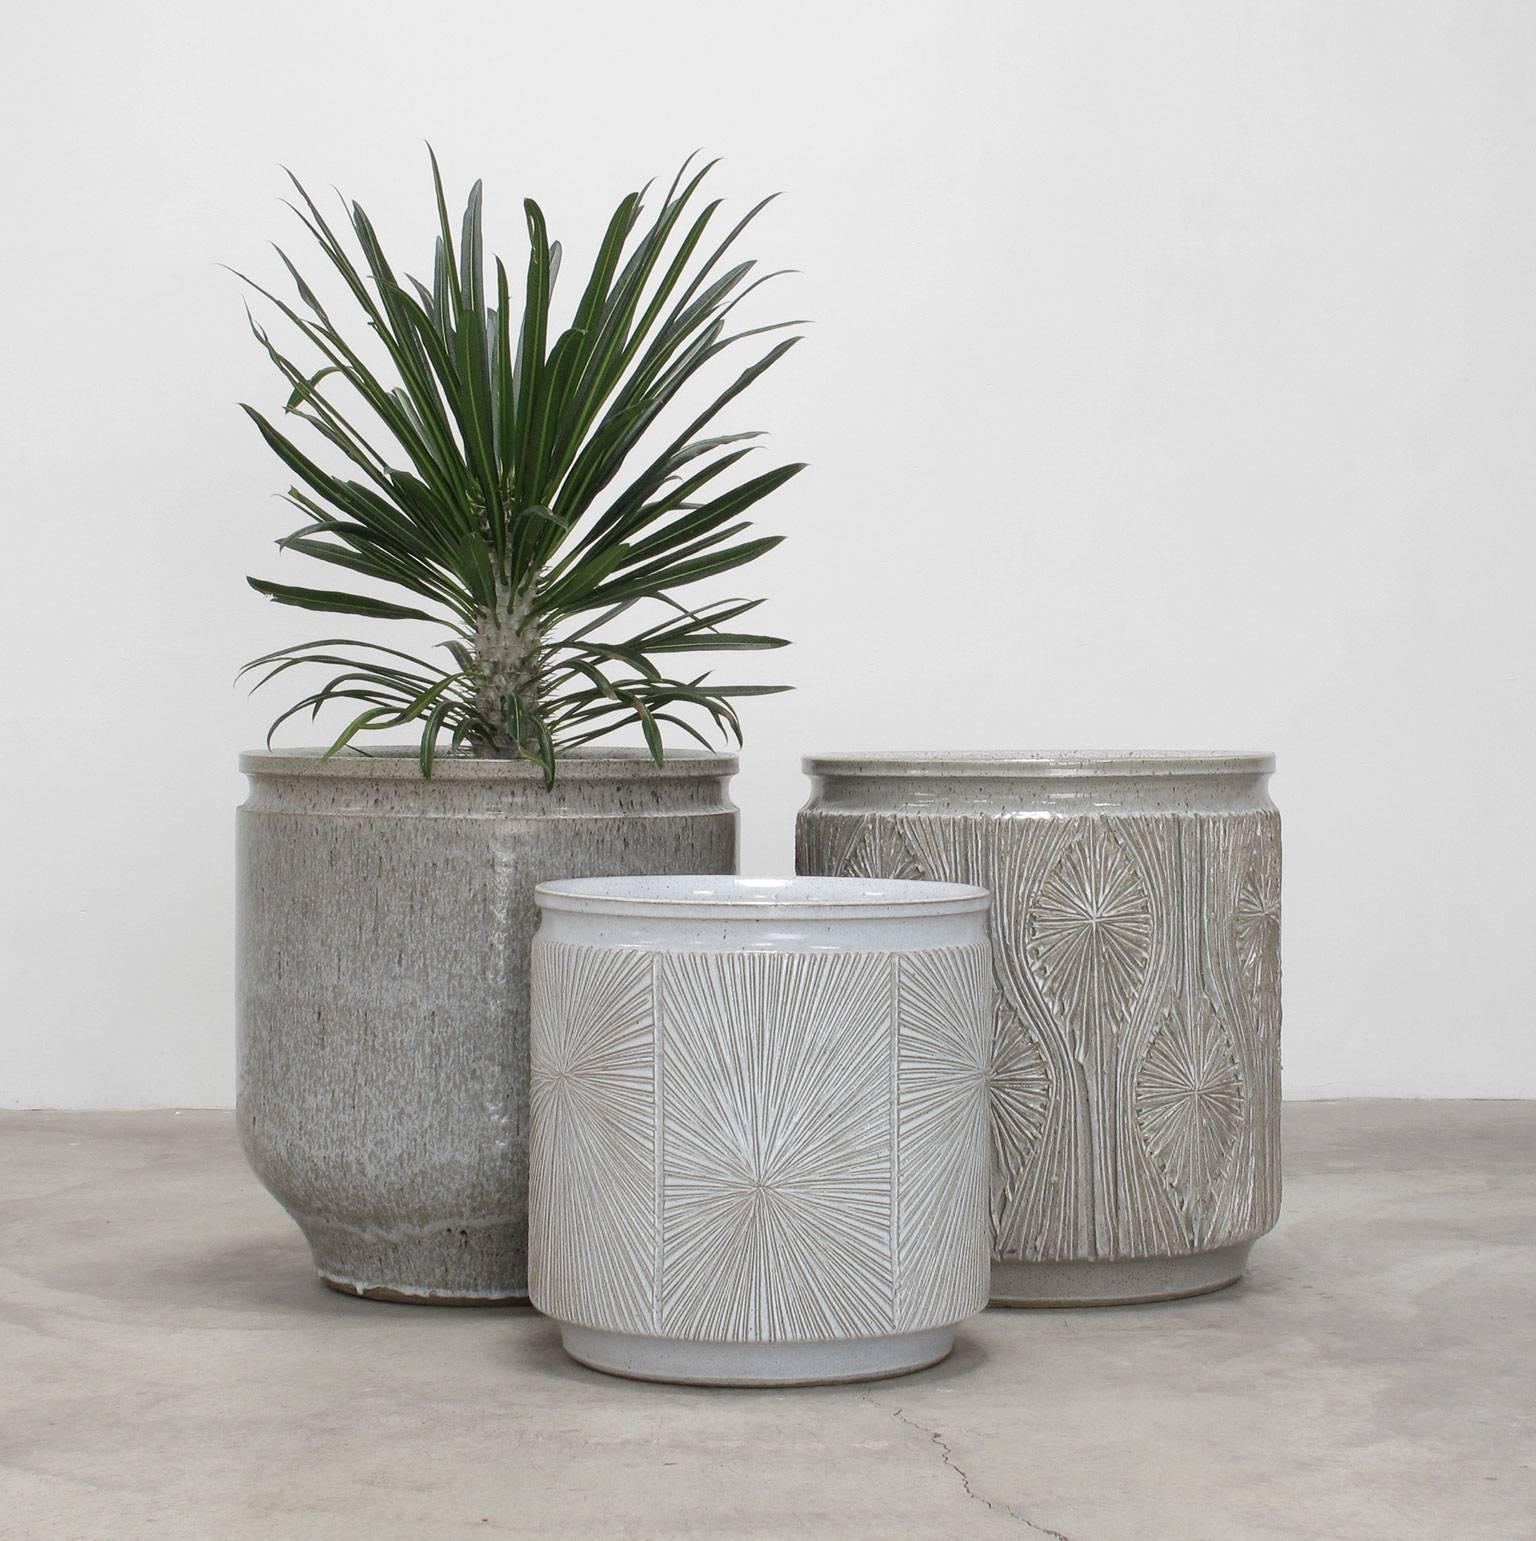 American David Cressey and Robert Maxwell Large Glazed Grey Ceramic Planter, 1970s For Sale